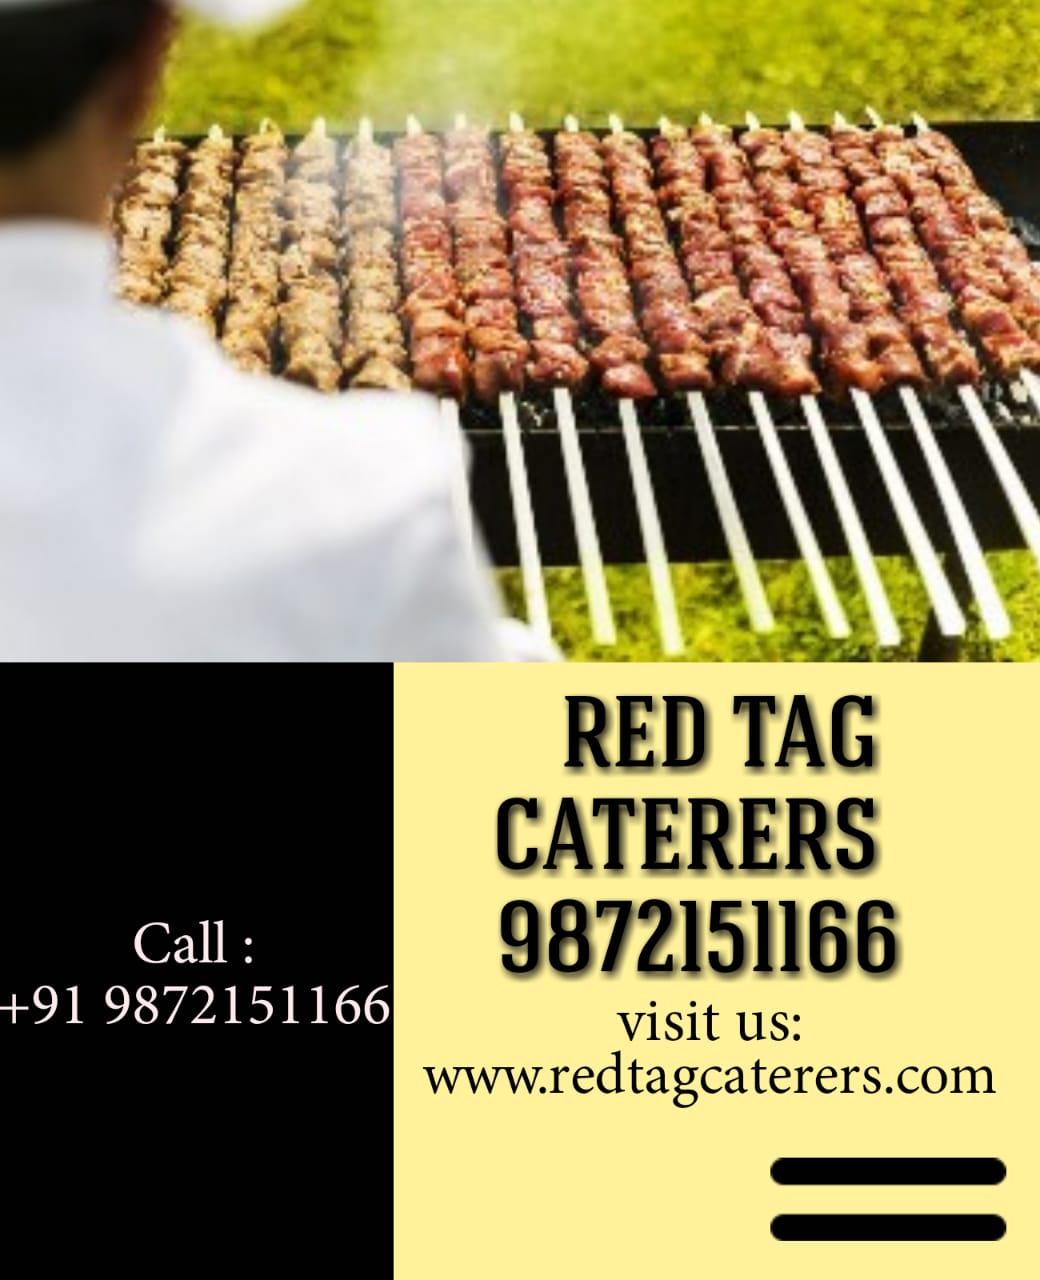 Corporate events caterers in mohali | Red Tag Caterers | corporate events caterers in mohali, marriage caterers in mohali, event caterers in mohali, best caterers in mohali, top 10 caterers in mohali - GL63923